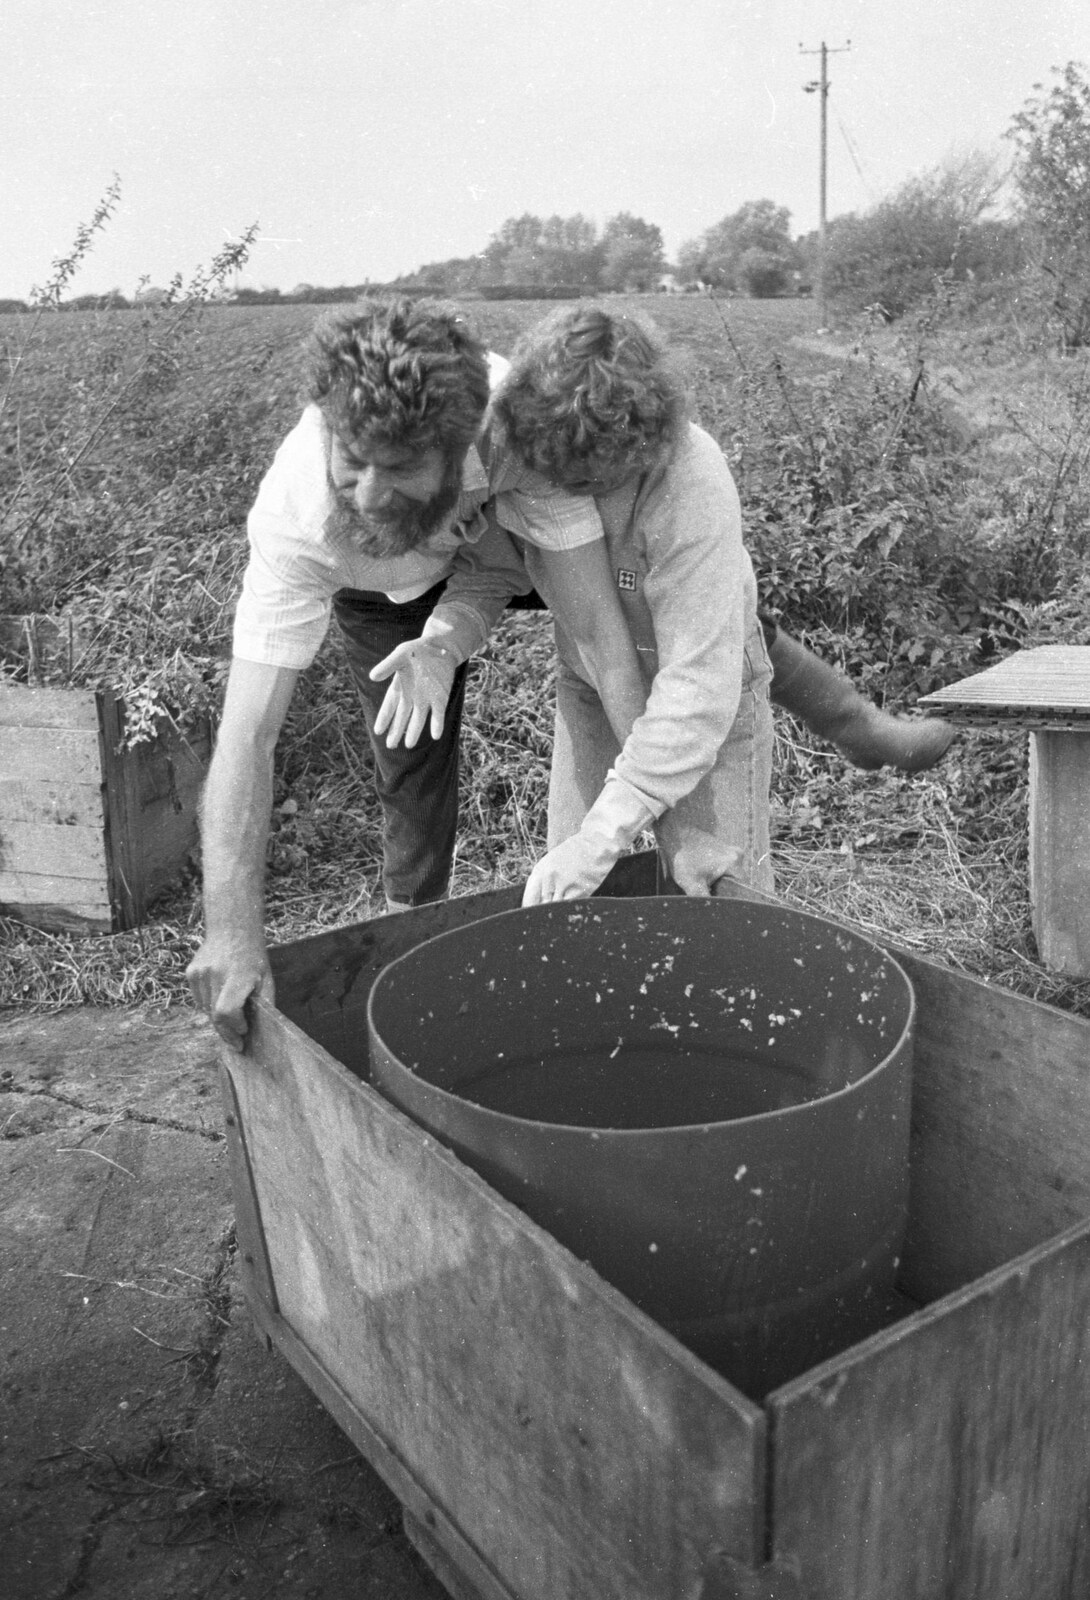 Mike and Brenda mess about from Cider Making in Black and White, Stuston, Suffolk - 11th October 1992